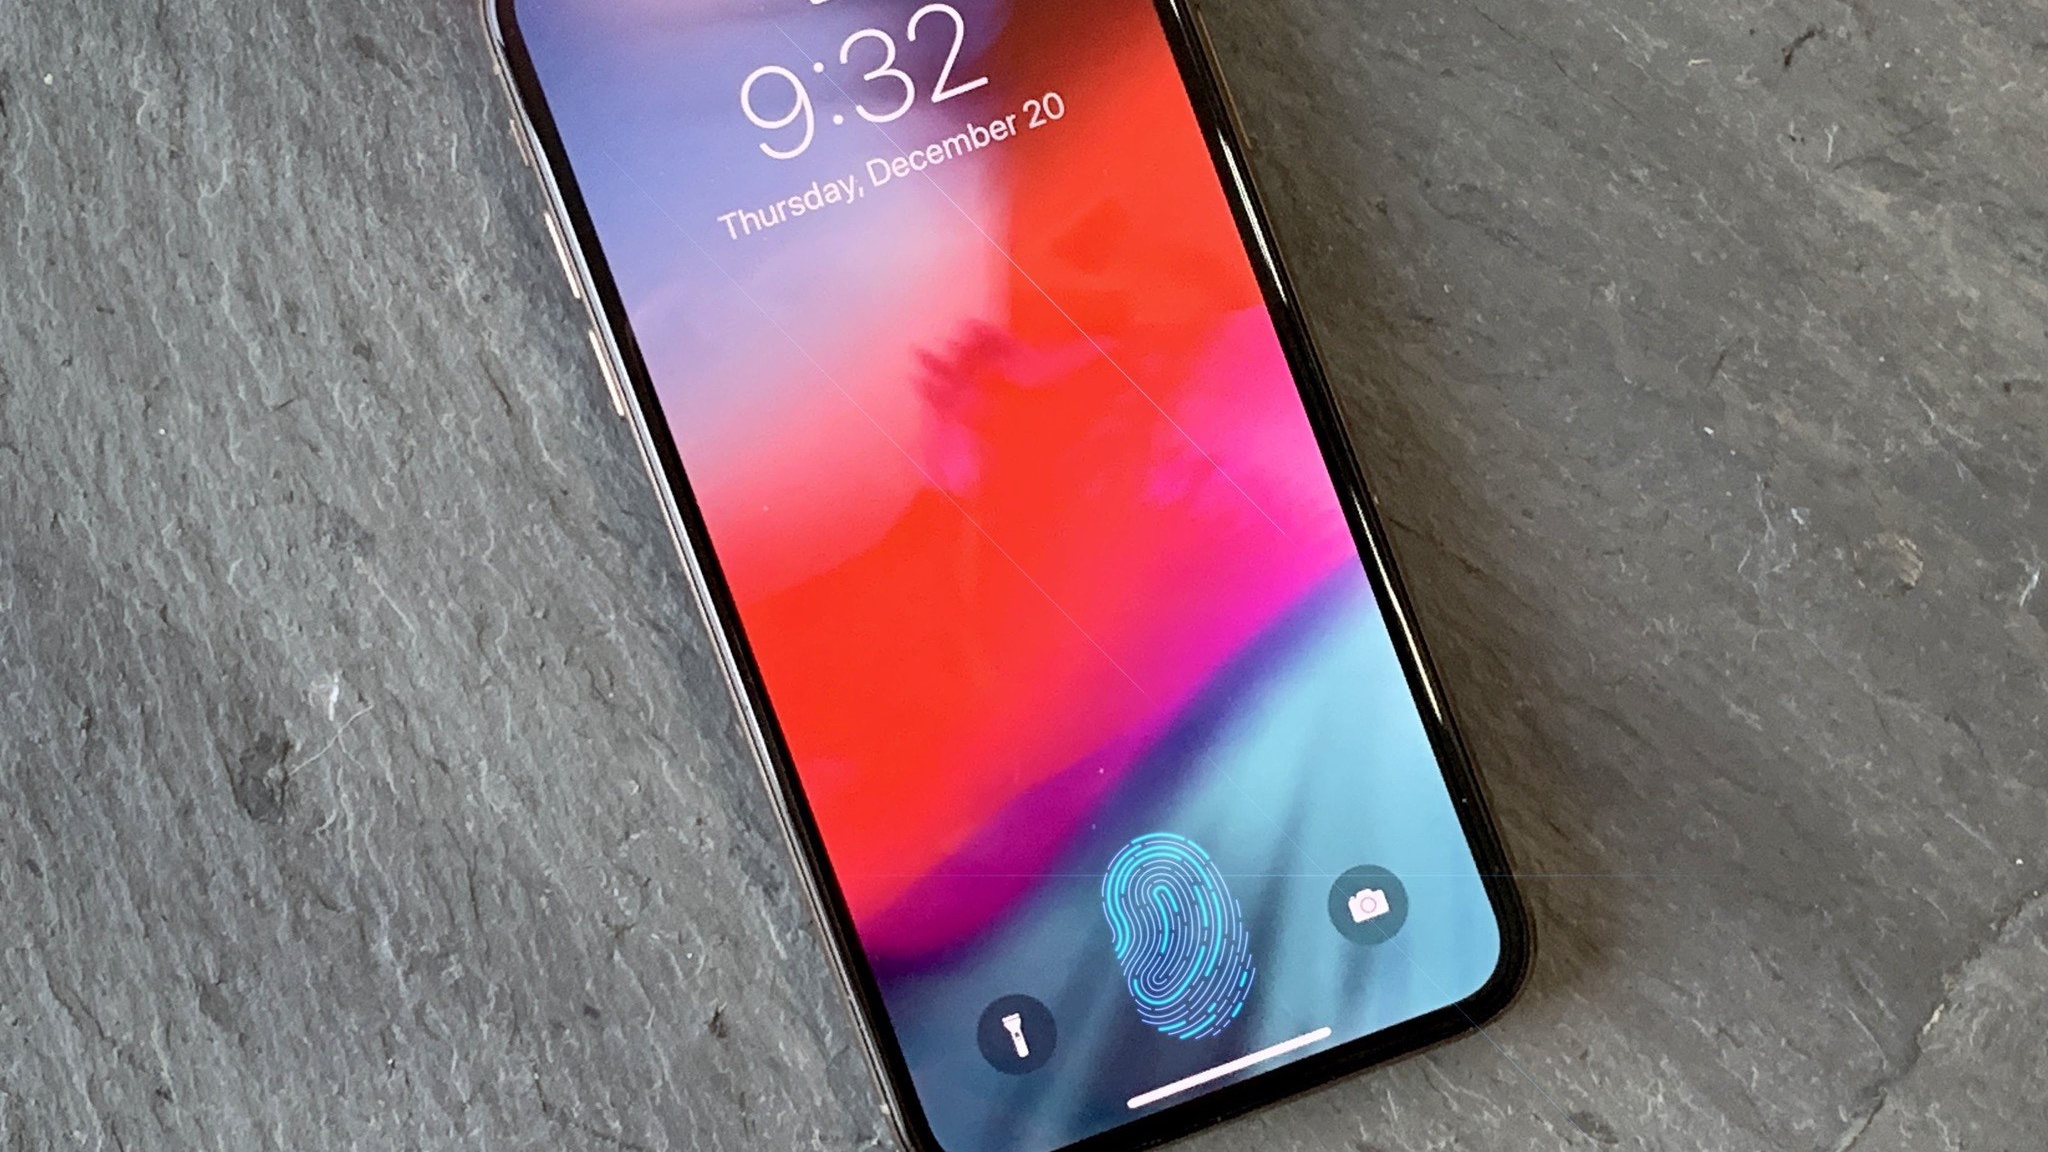 iPhone X with Touch ID